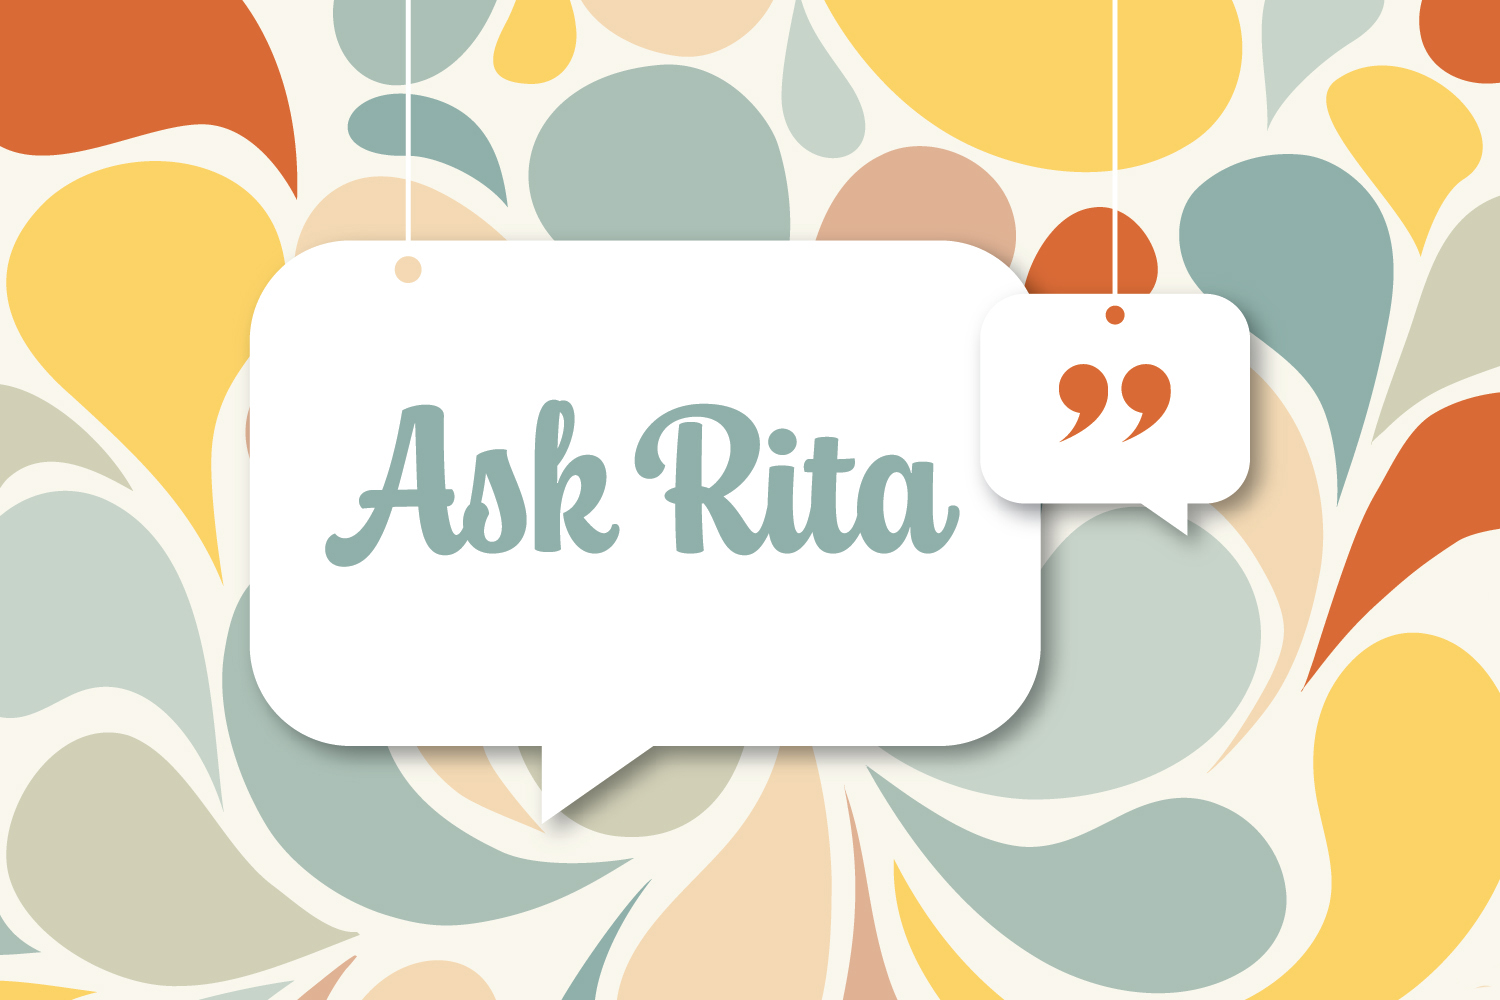 Ask Rita: An Employee Isn’t Holding Up Their End of the ADA Interactive Process—What Do I Do?